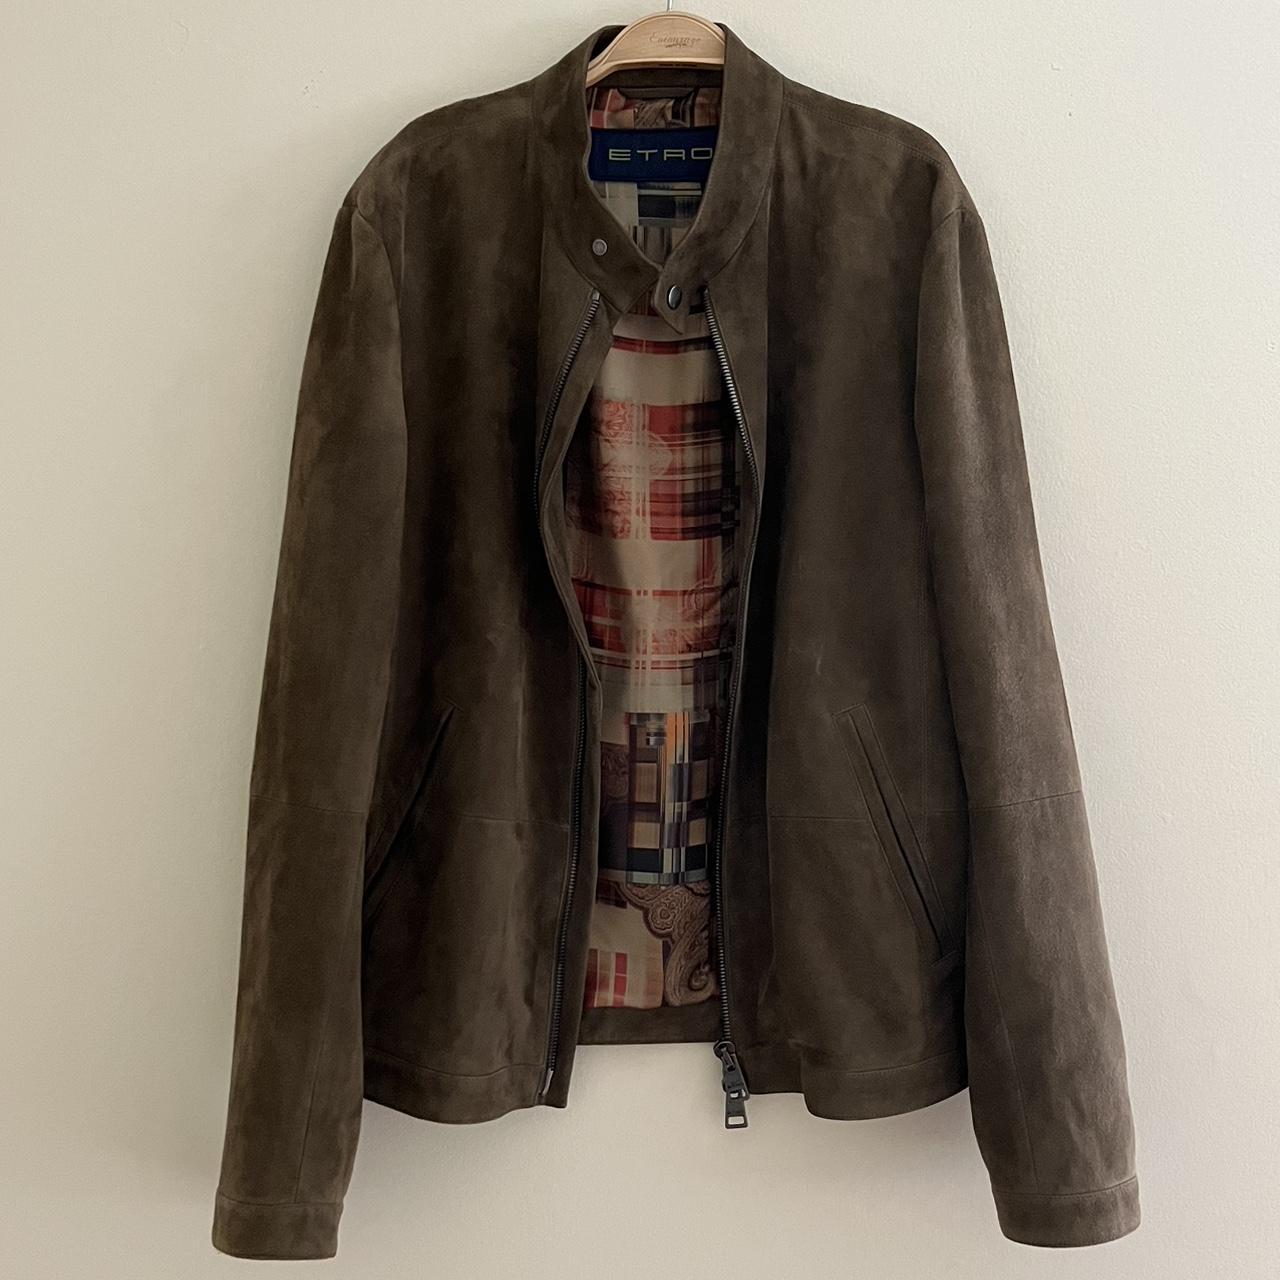 Etro Men's Brown and Red Jacket